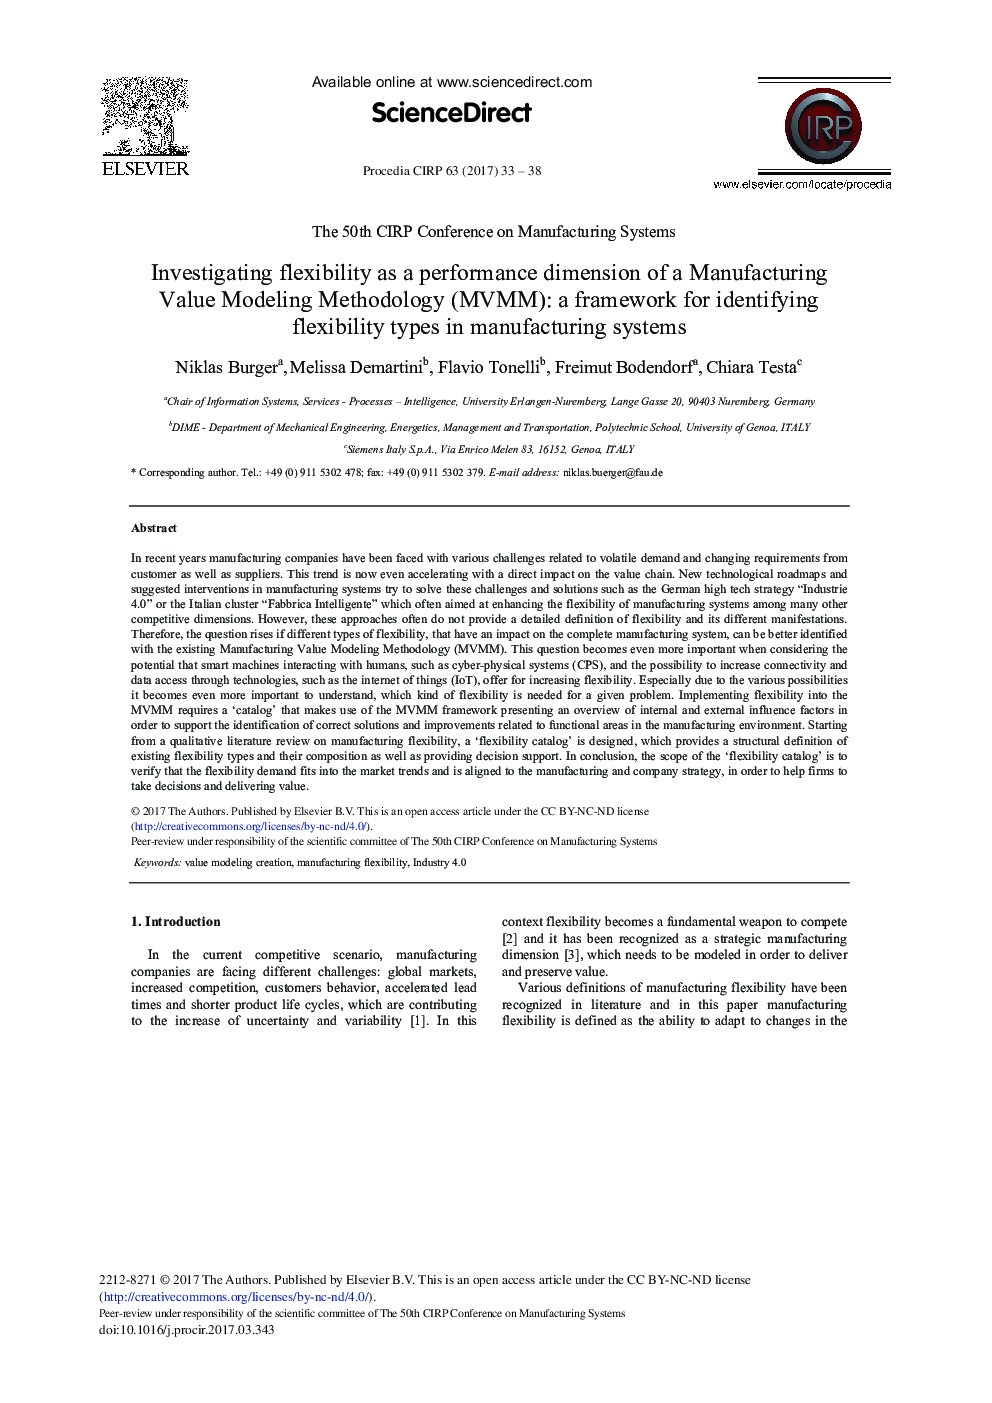 Investigating Flexibility as a Performance Dimension of a Manufacturing Value Modeling Methodology (MVMM): A Framework for Identifying Flexibility Types in Manufacturing Systems